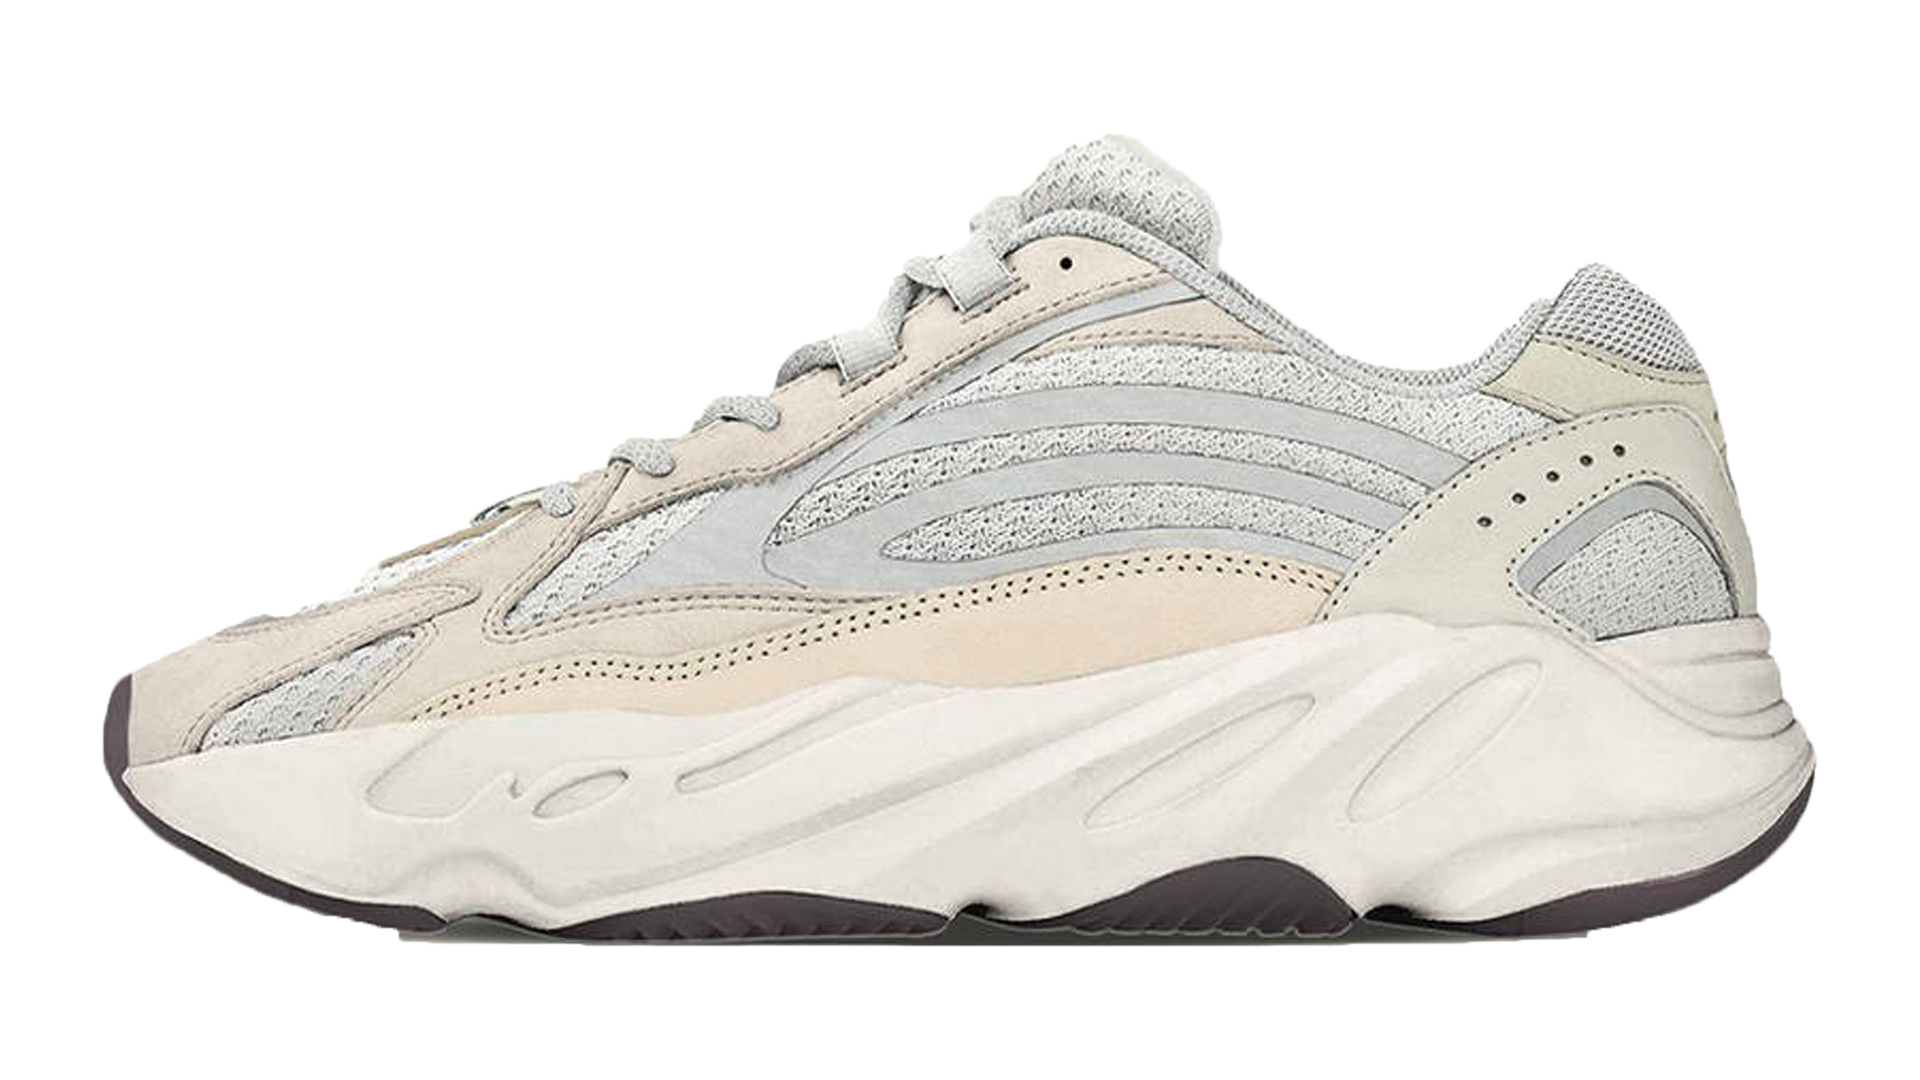 Adidas Yeezy Boost 700 V2 Cream Wallpapers - Wallpaper Cave